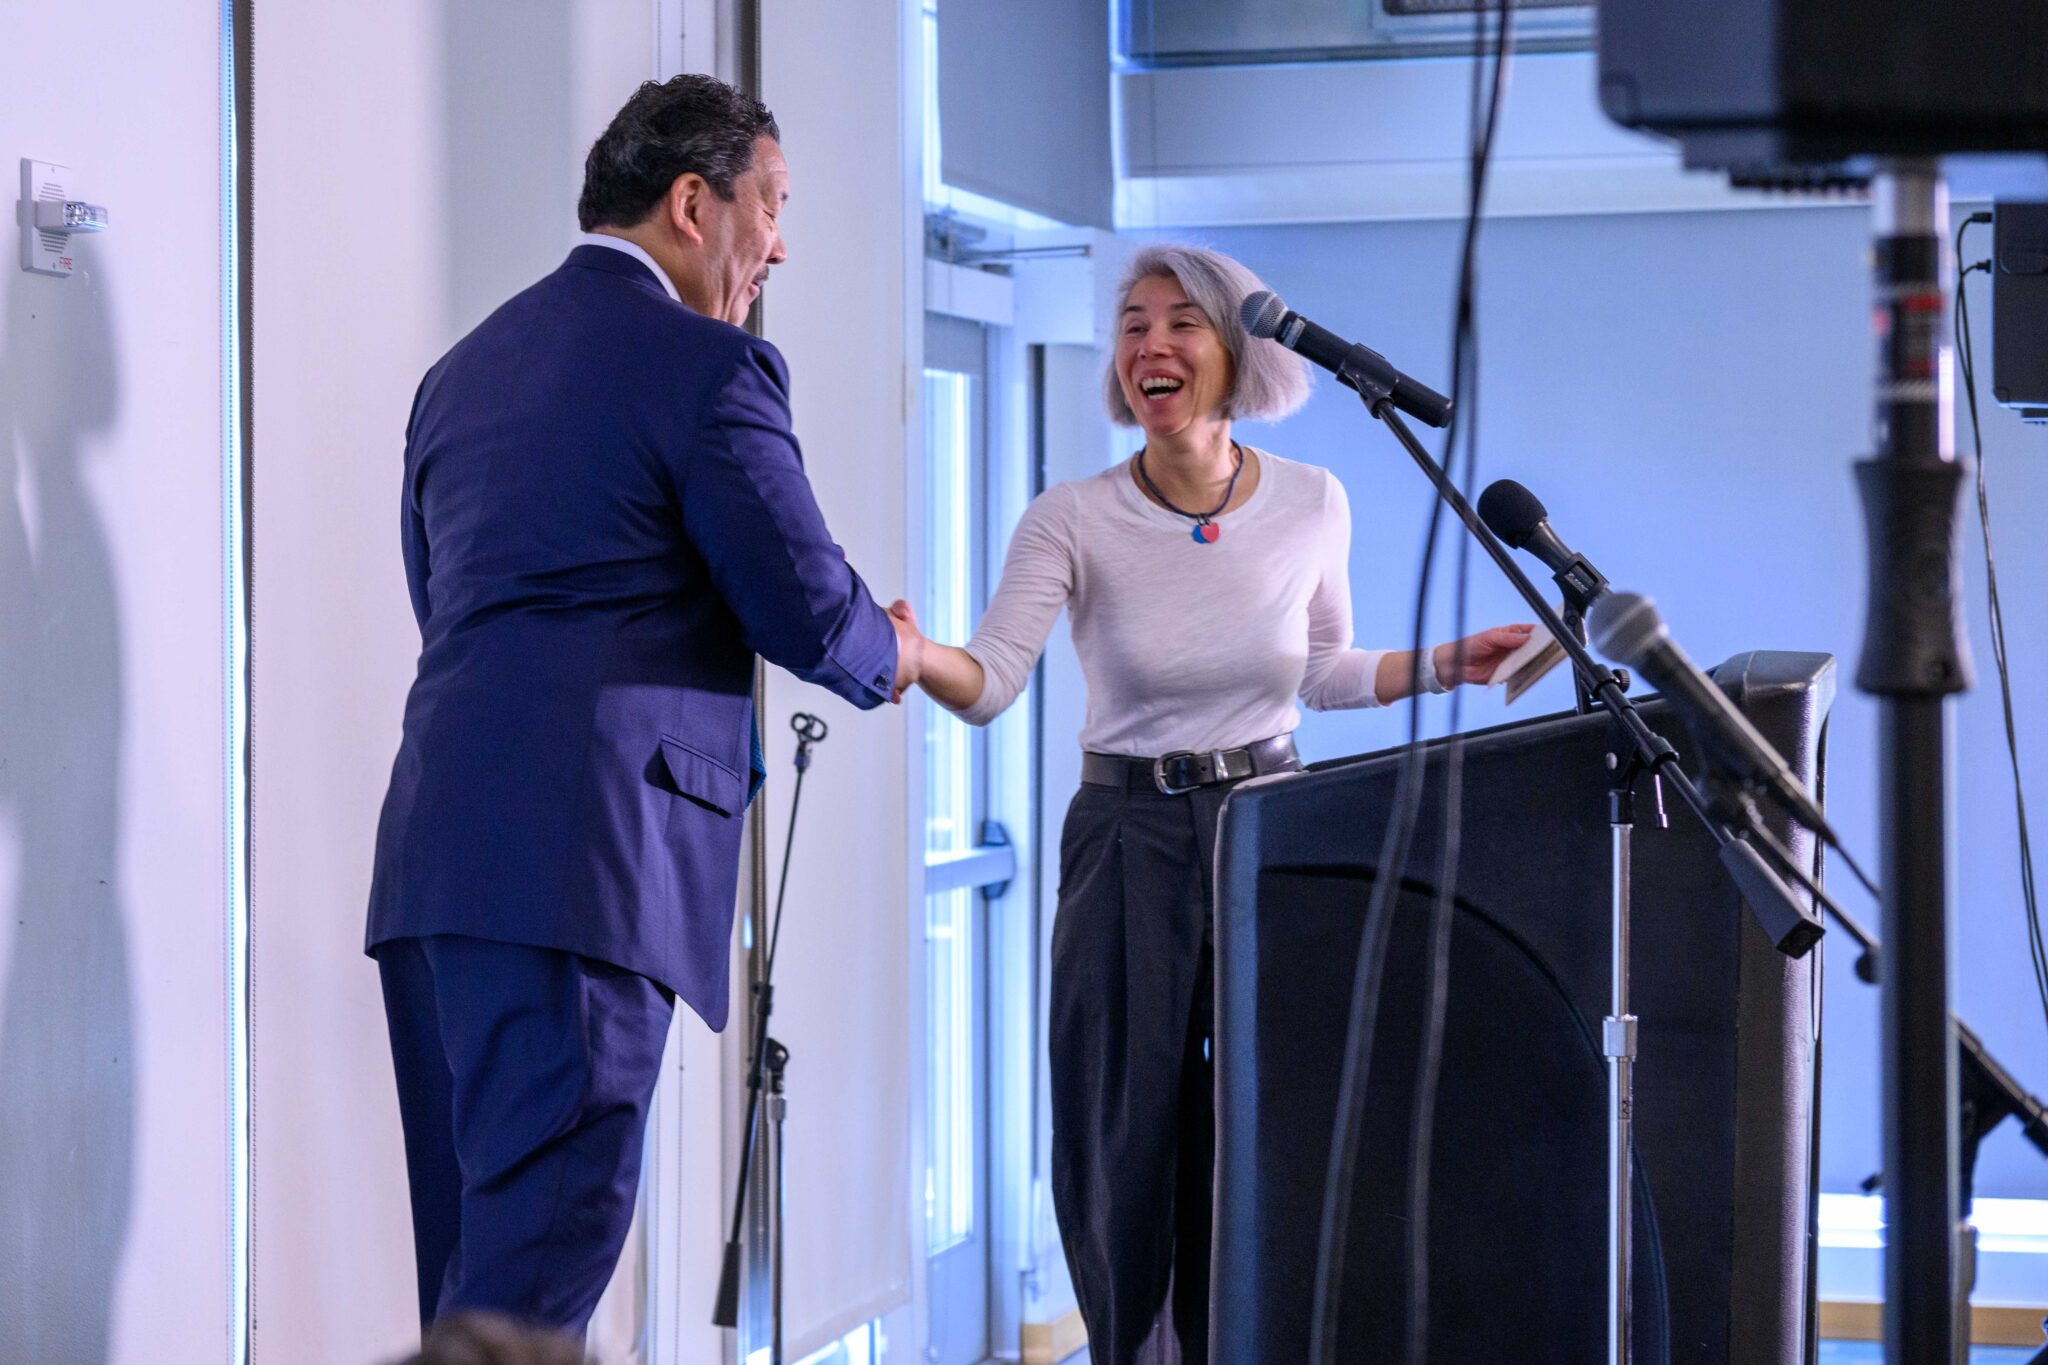 Maiko Winkler-Chin, Director, Seattle Office of Housing, shaking hands with Mayor Bruce Harrell onstage